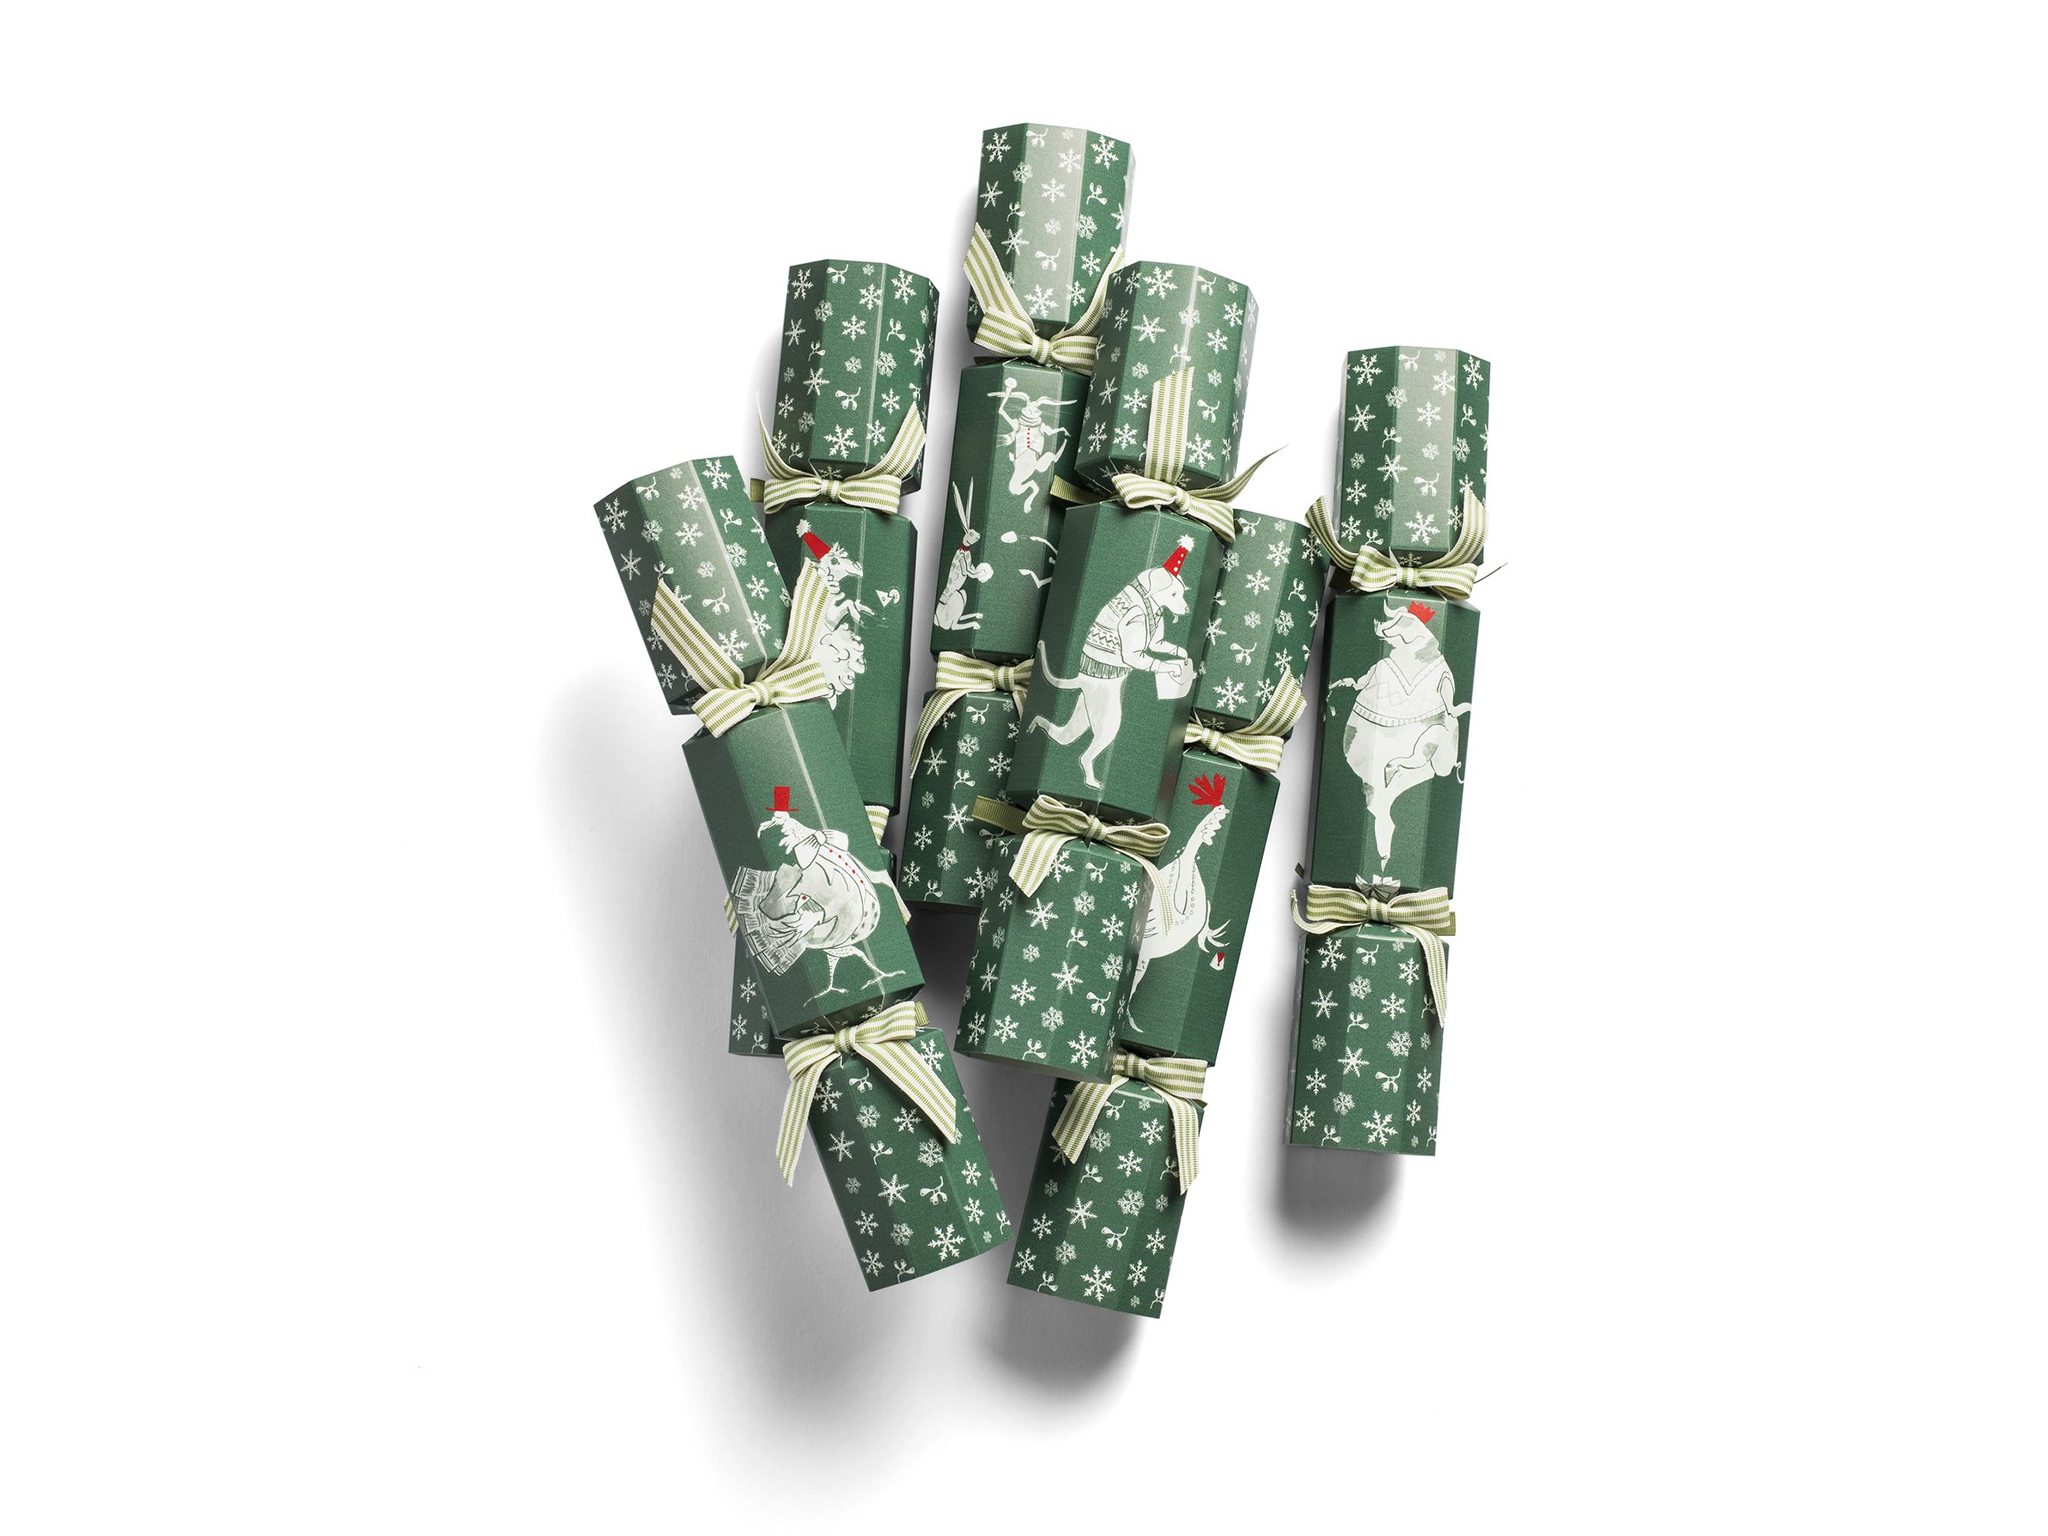 Daylesford Organic party animal Christmas crackers